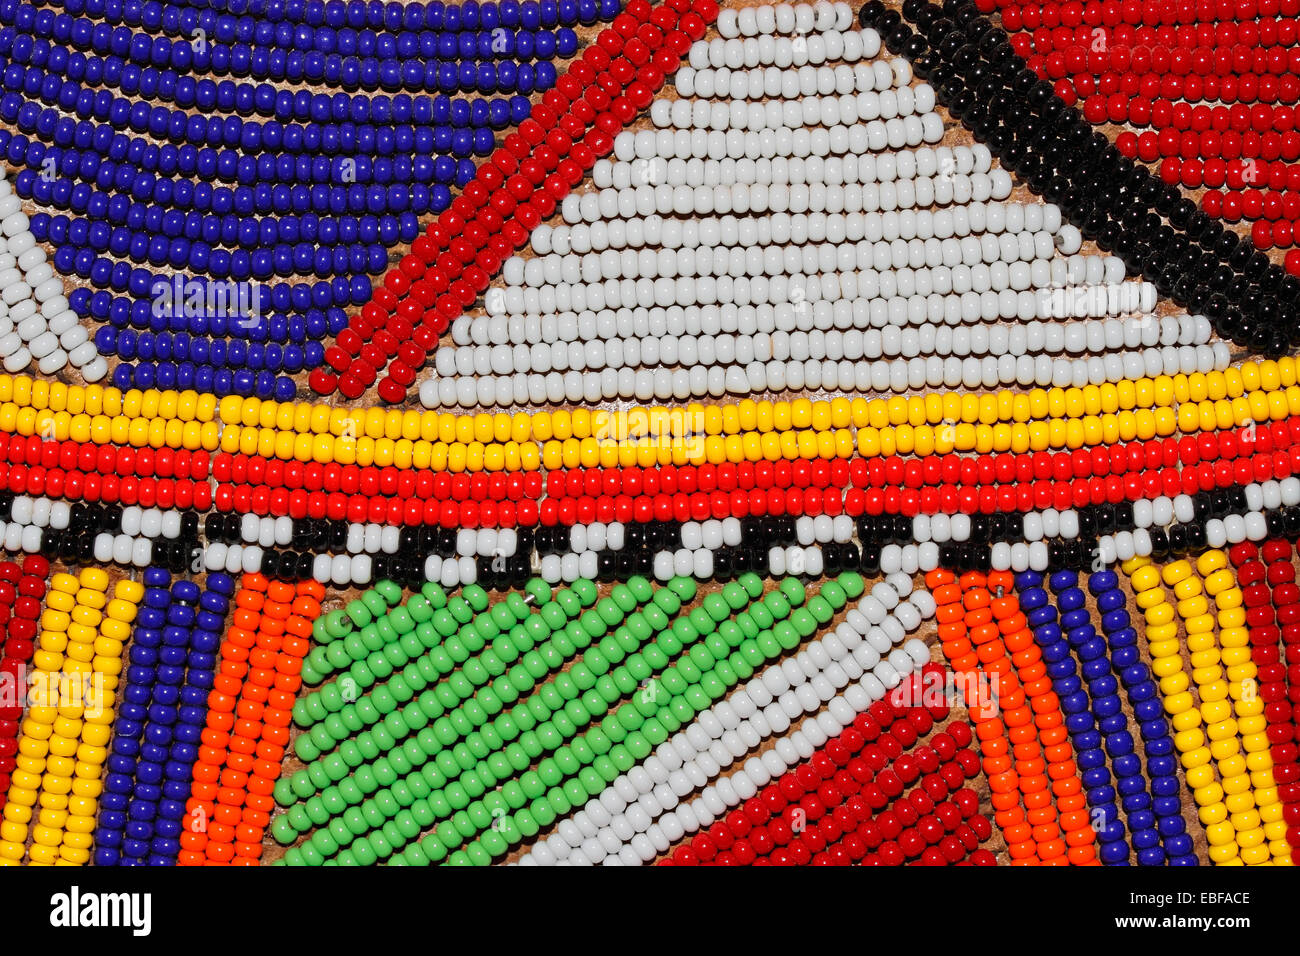 Colorful African beads used as decoration by the Masai tribe in Kenya Stock Photo